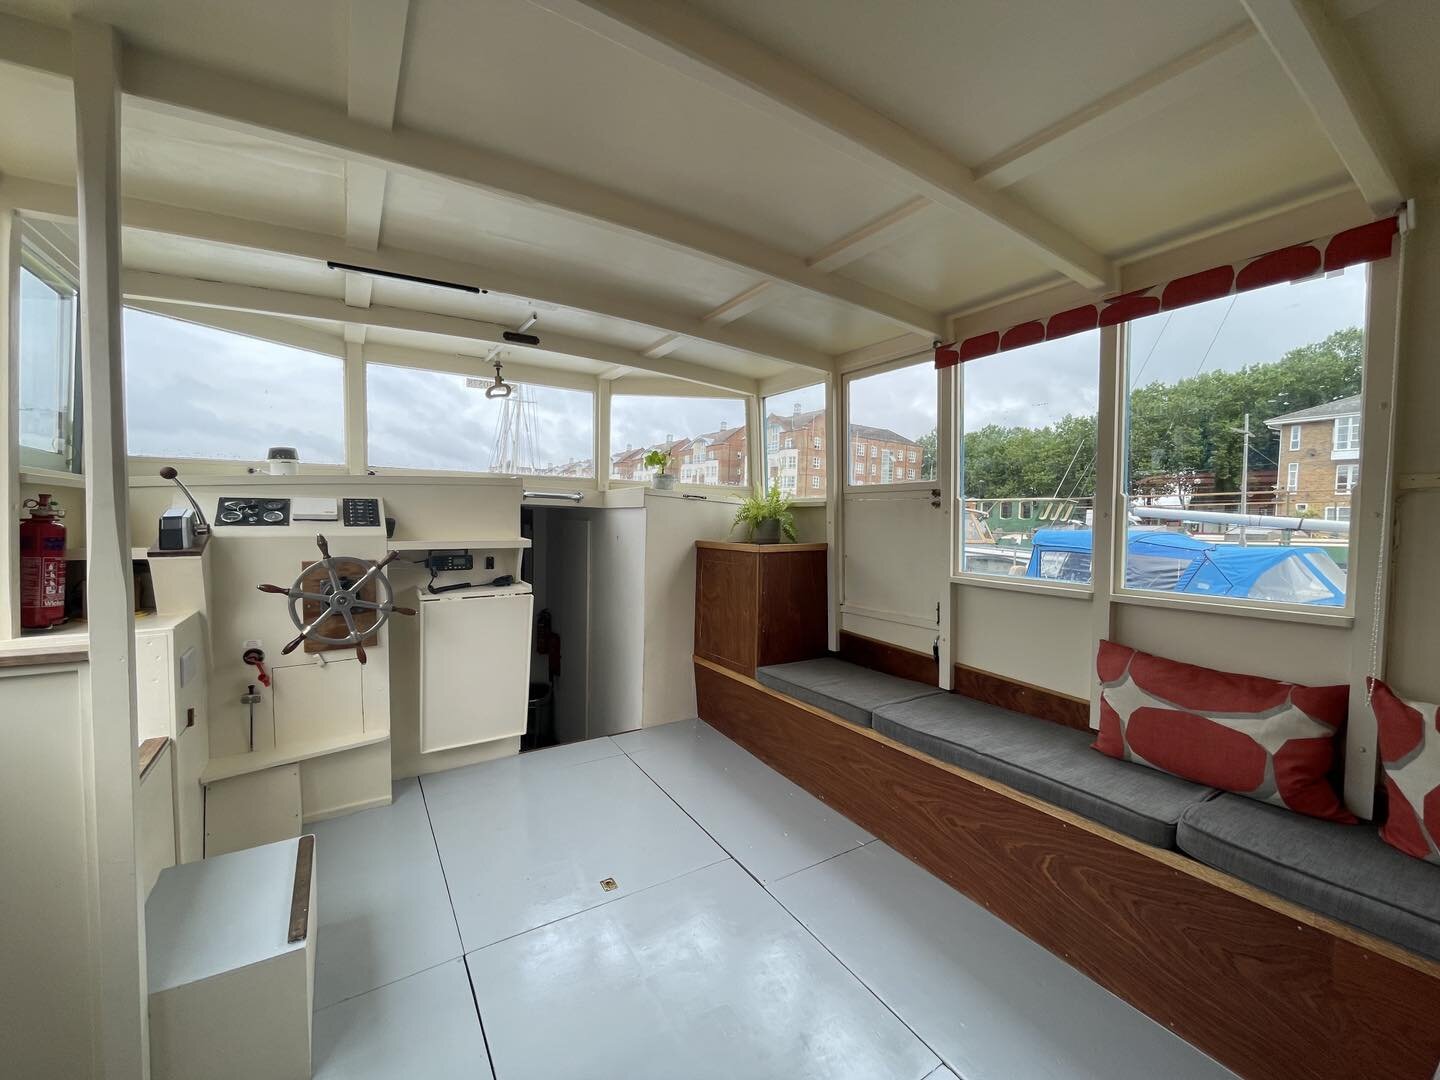 Plenty of room for a dining table or #wfh deck in the bright wheelhouse of his converted Admiralty  launch for sale #greenlanddock #greenlanddocks #boatsforsale #surreyquays #canadawater #southdockmarina #boatsforsaleuk #liveaboard #liveaboardlife  #